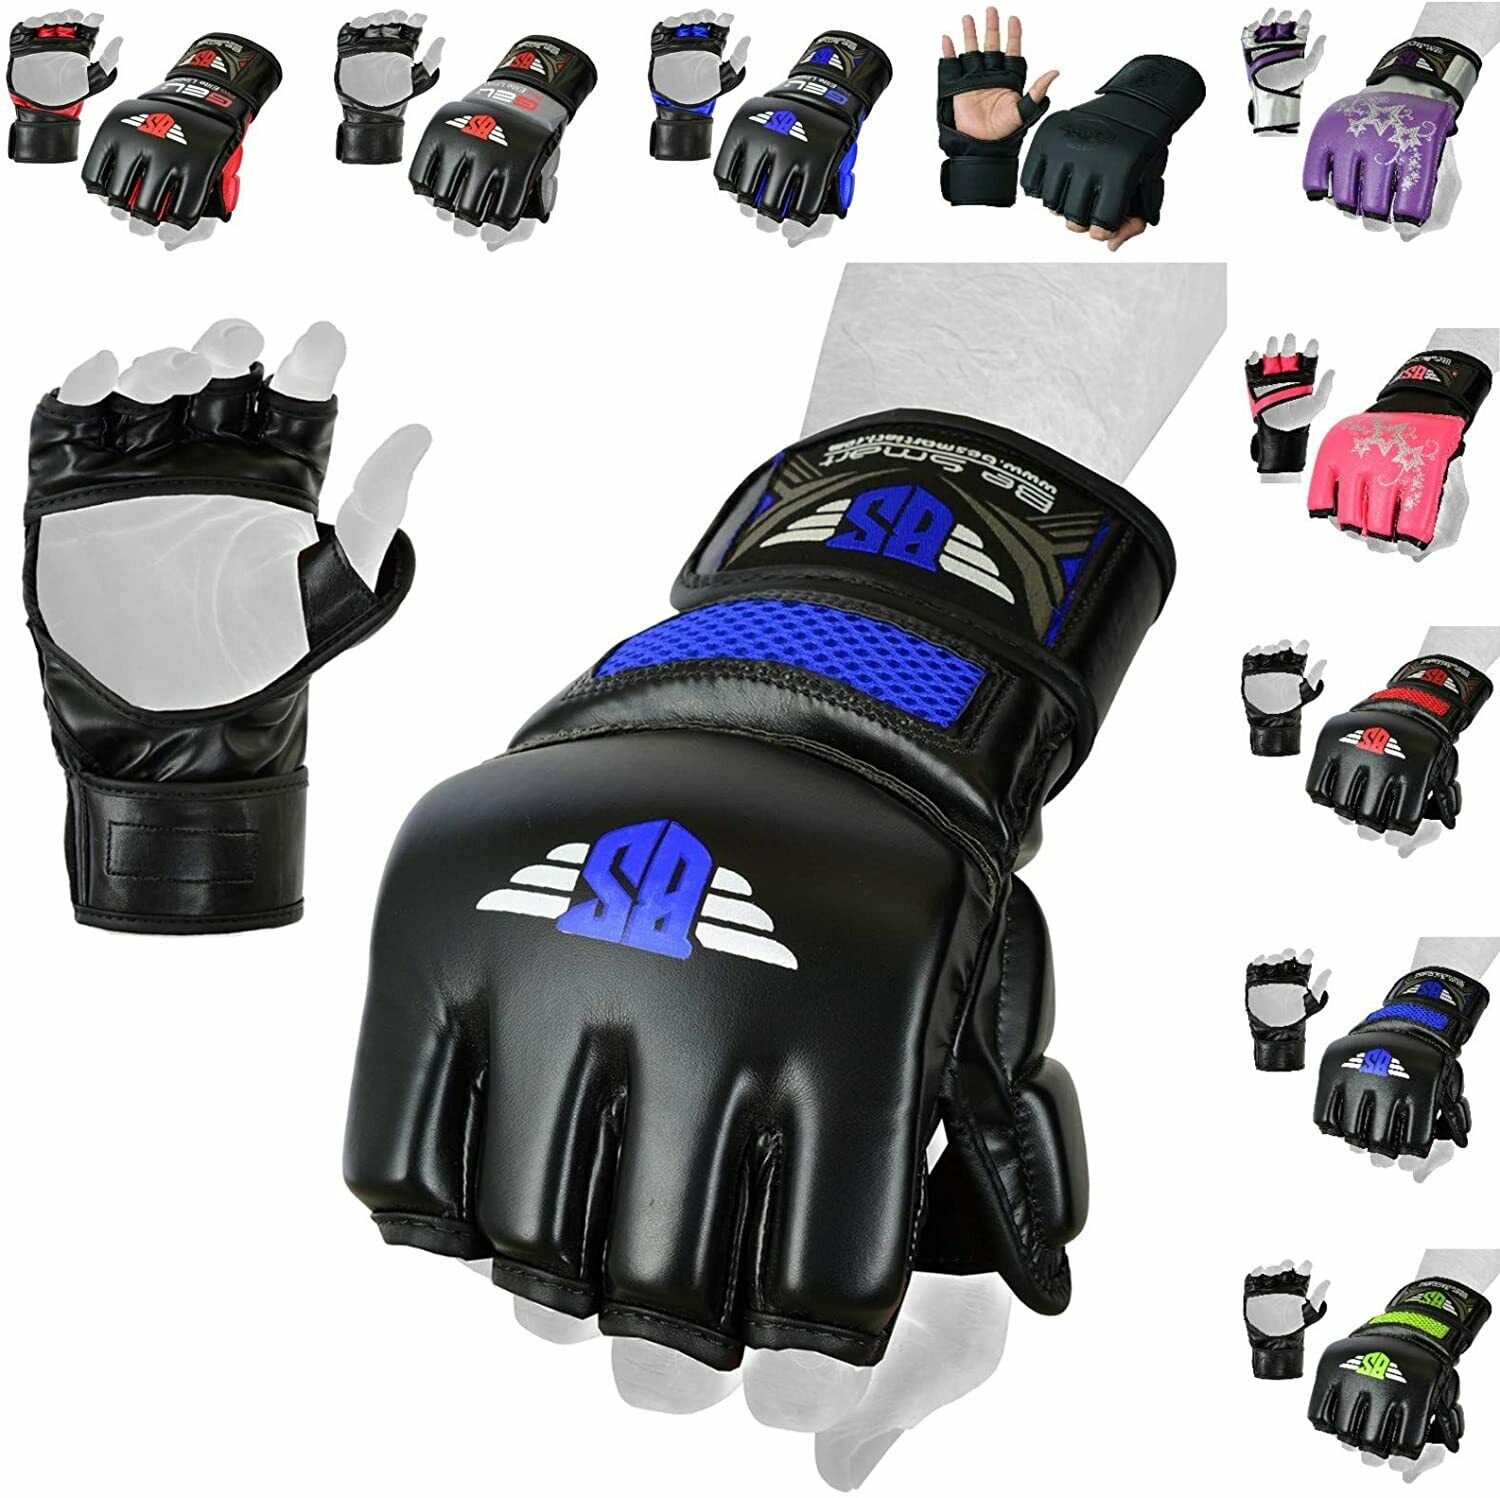 Boxing Mma Gloves Grappling Punching Bag Training Kickboxing Fight Sparring Ufc